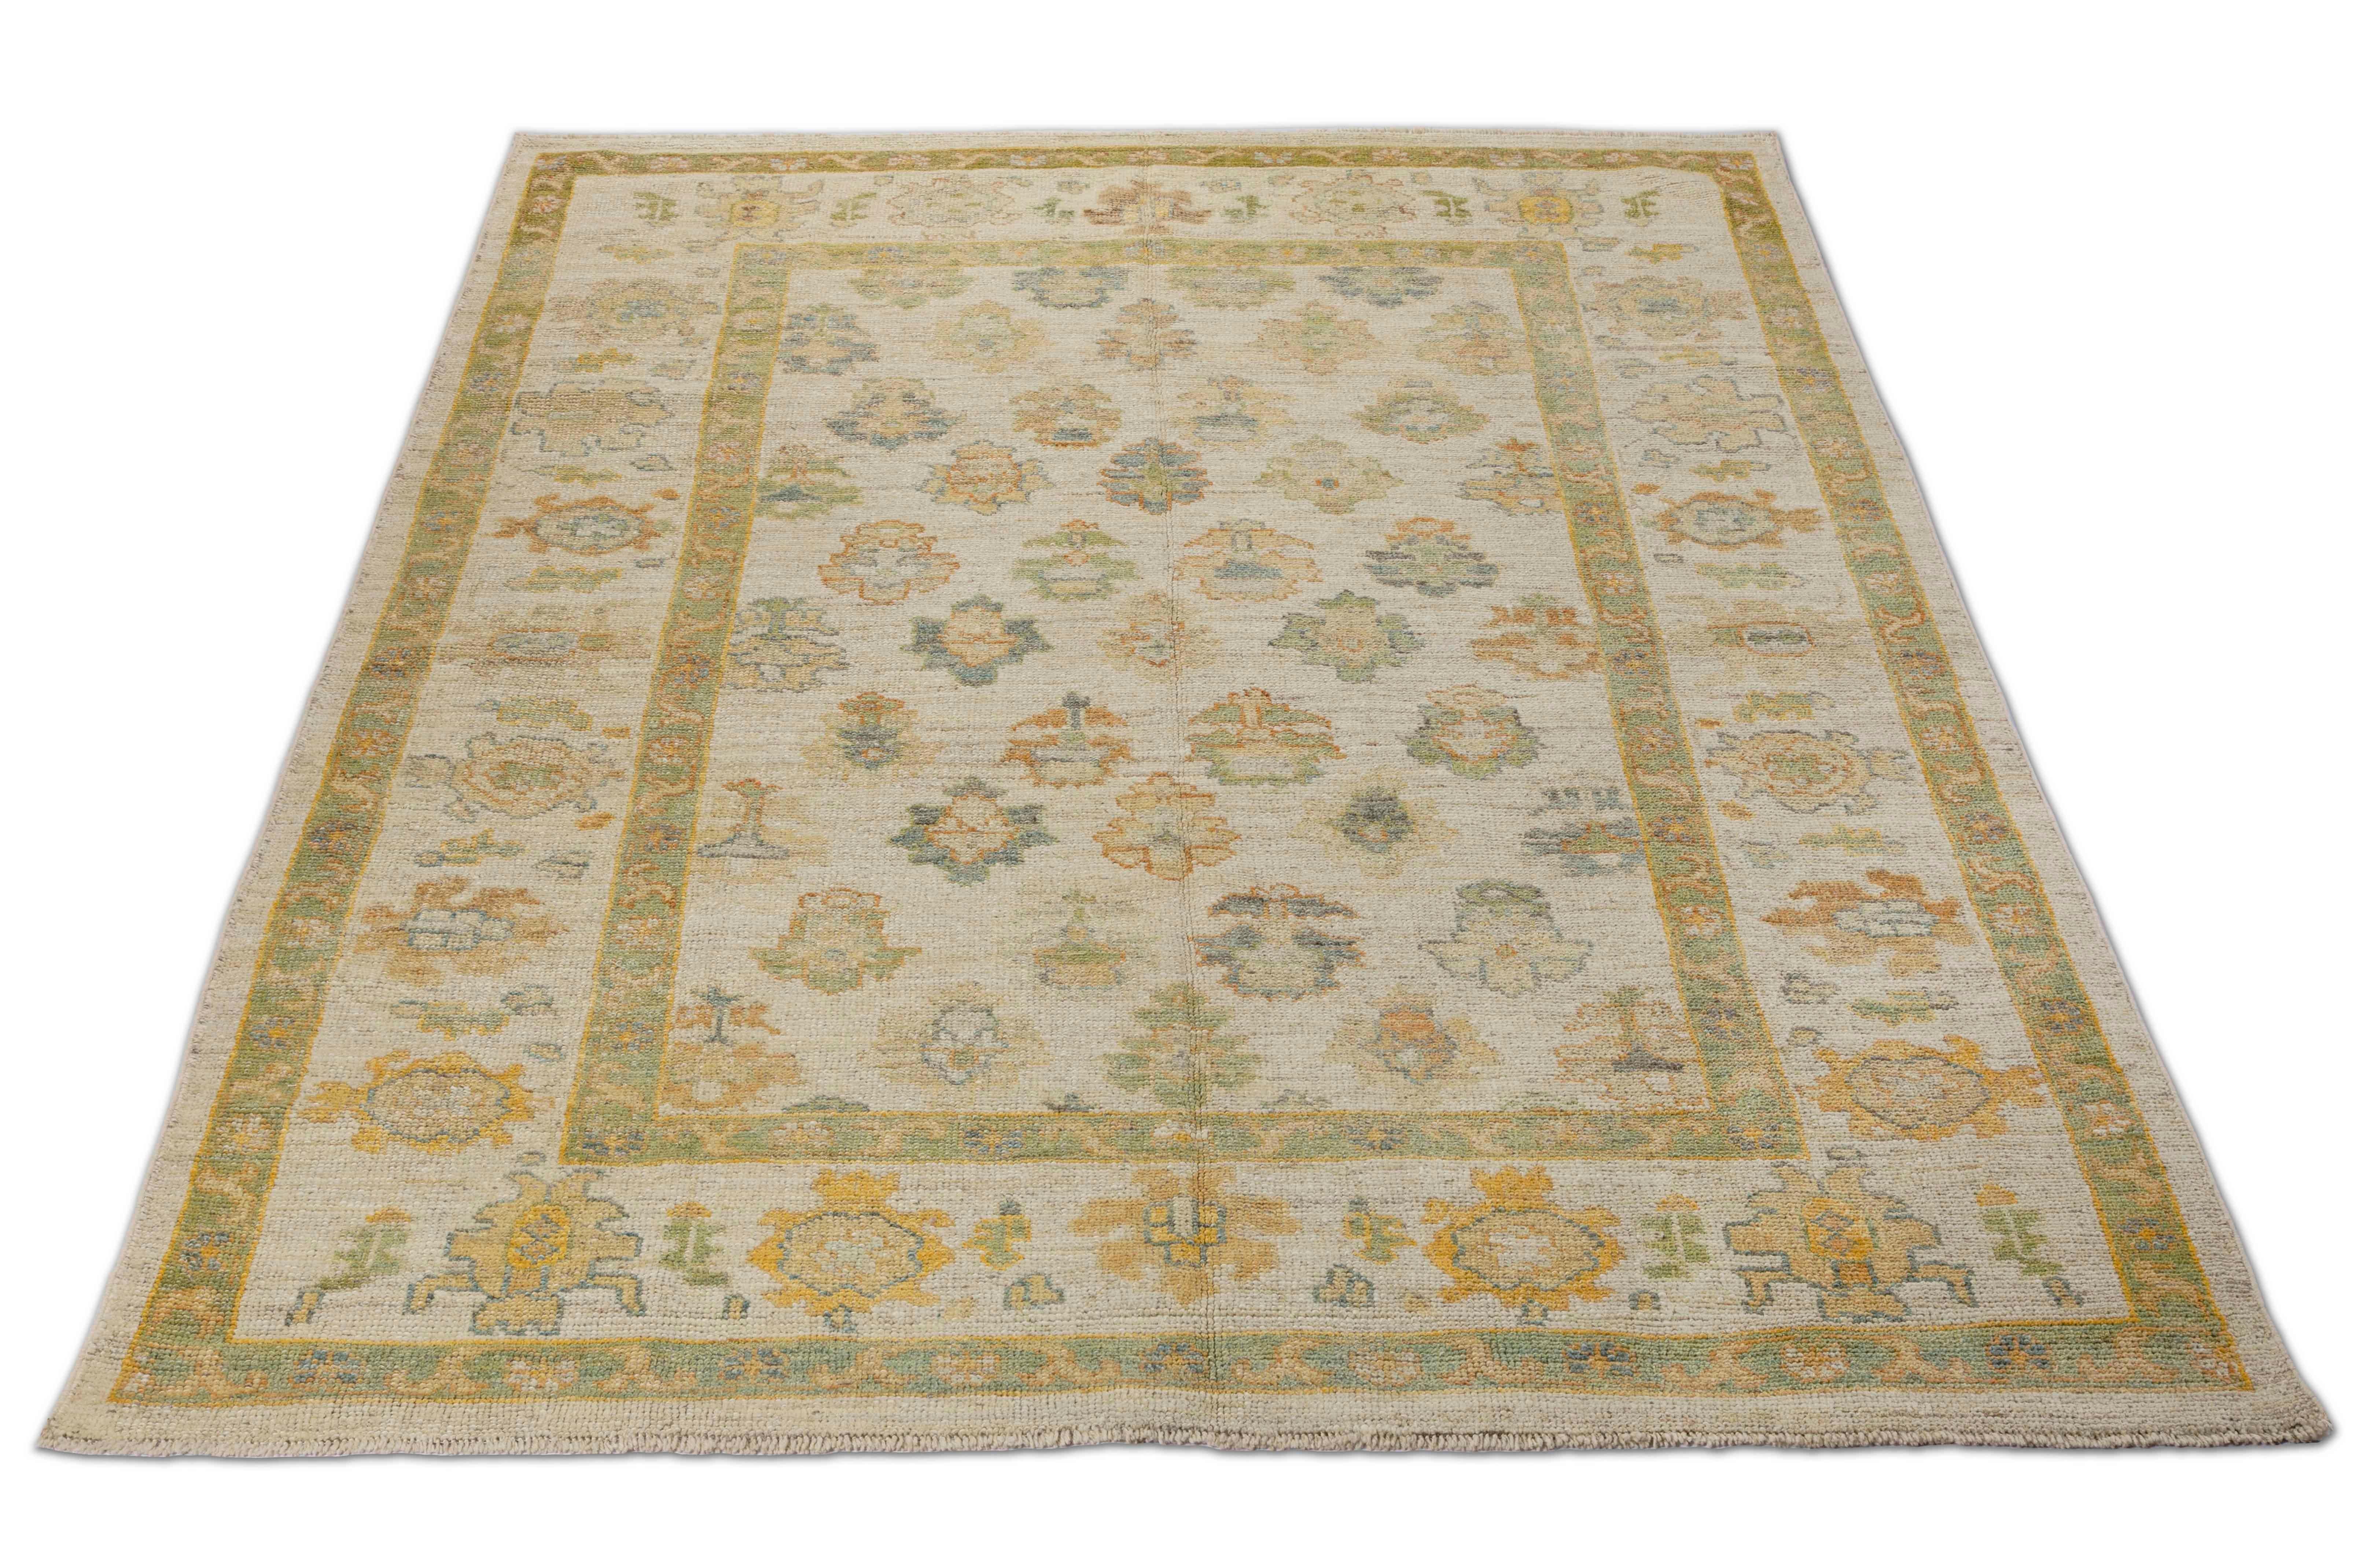 Contemporary Turkish rug made of handwoven sheep’s wool of the finest quality. It’s colored with organic vegetable dyes that are certified safe for humans and pets alike. It features a large, beige field with flower details allover associated with